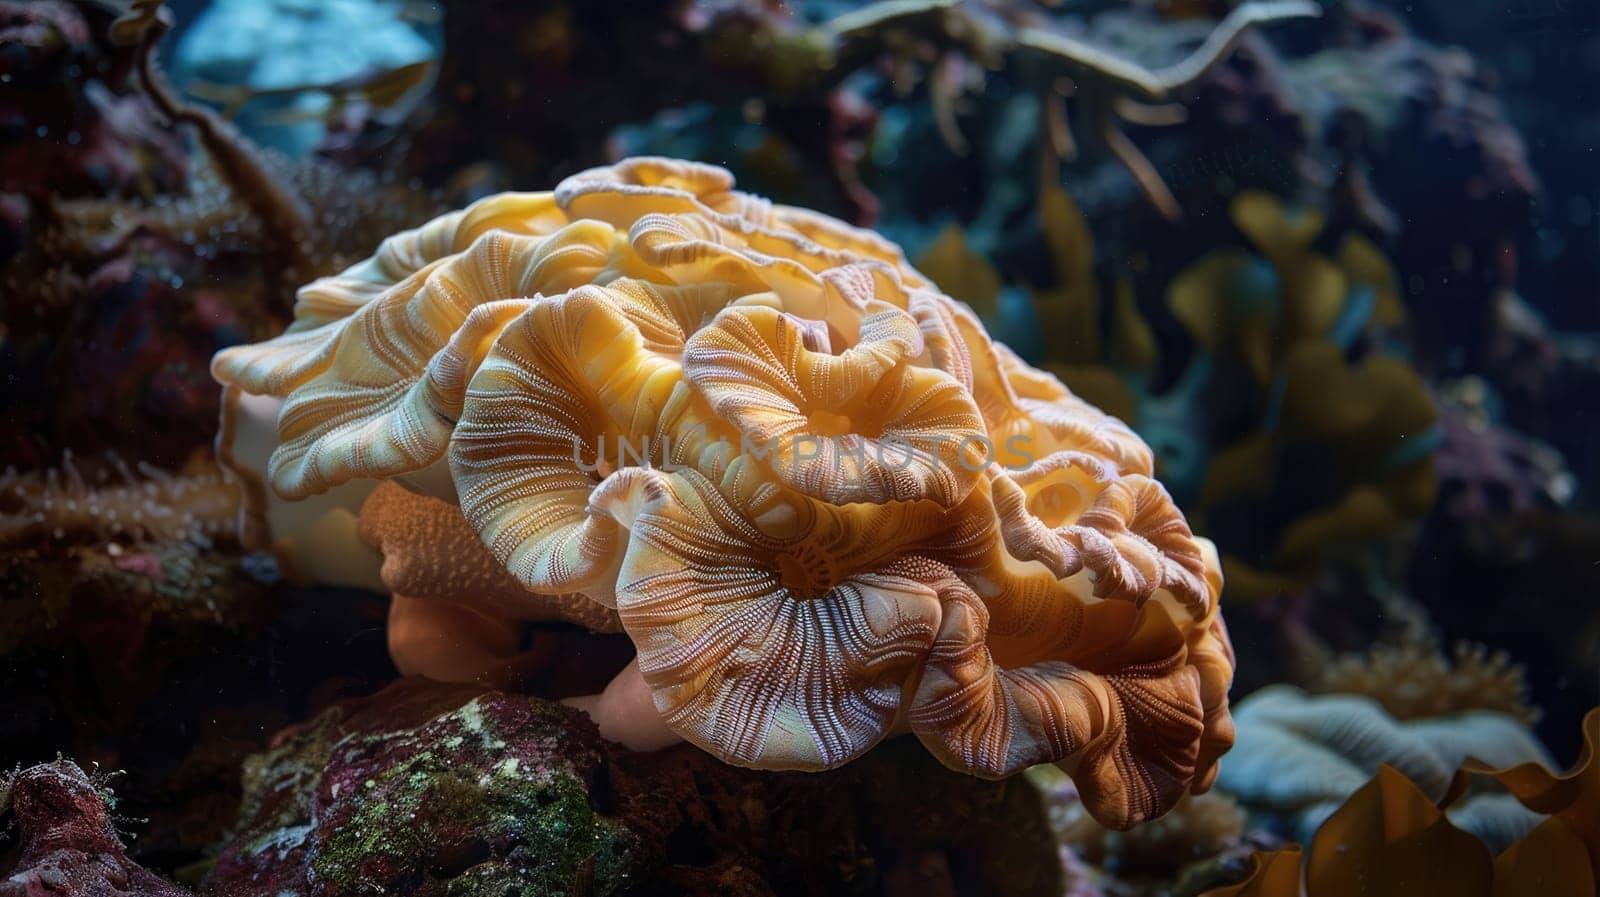 The organism resembling a brain found in coral reefs underwater is a large coral, a vital component of marine biology AI